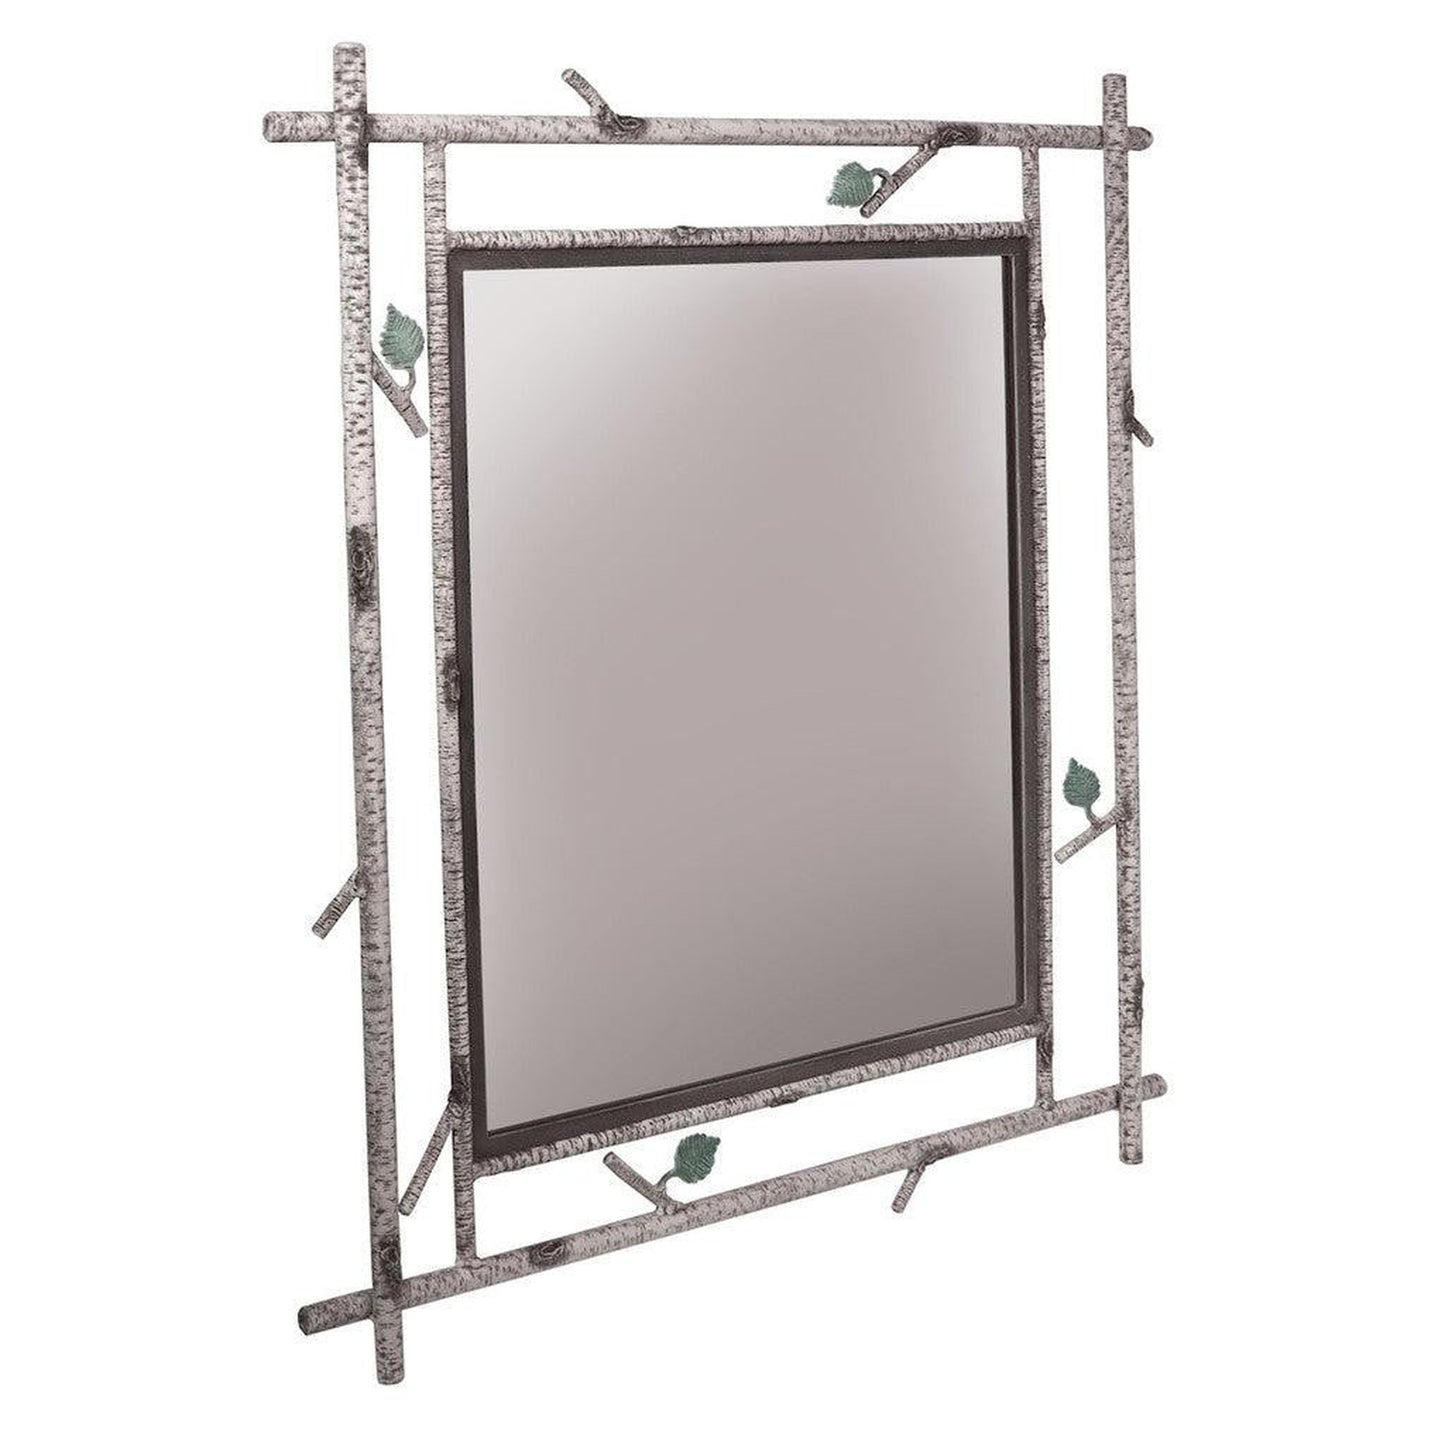 Stone County Ironworks Whisper Creek 30" x 34" Small Woodland Brown Iron Wall Mirror With Copper Iron Accent